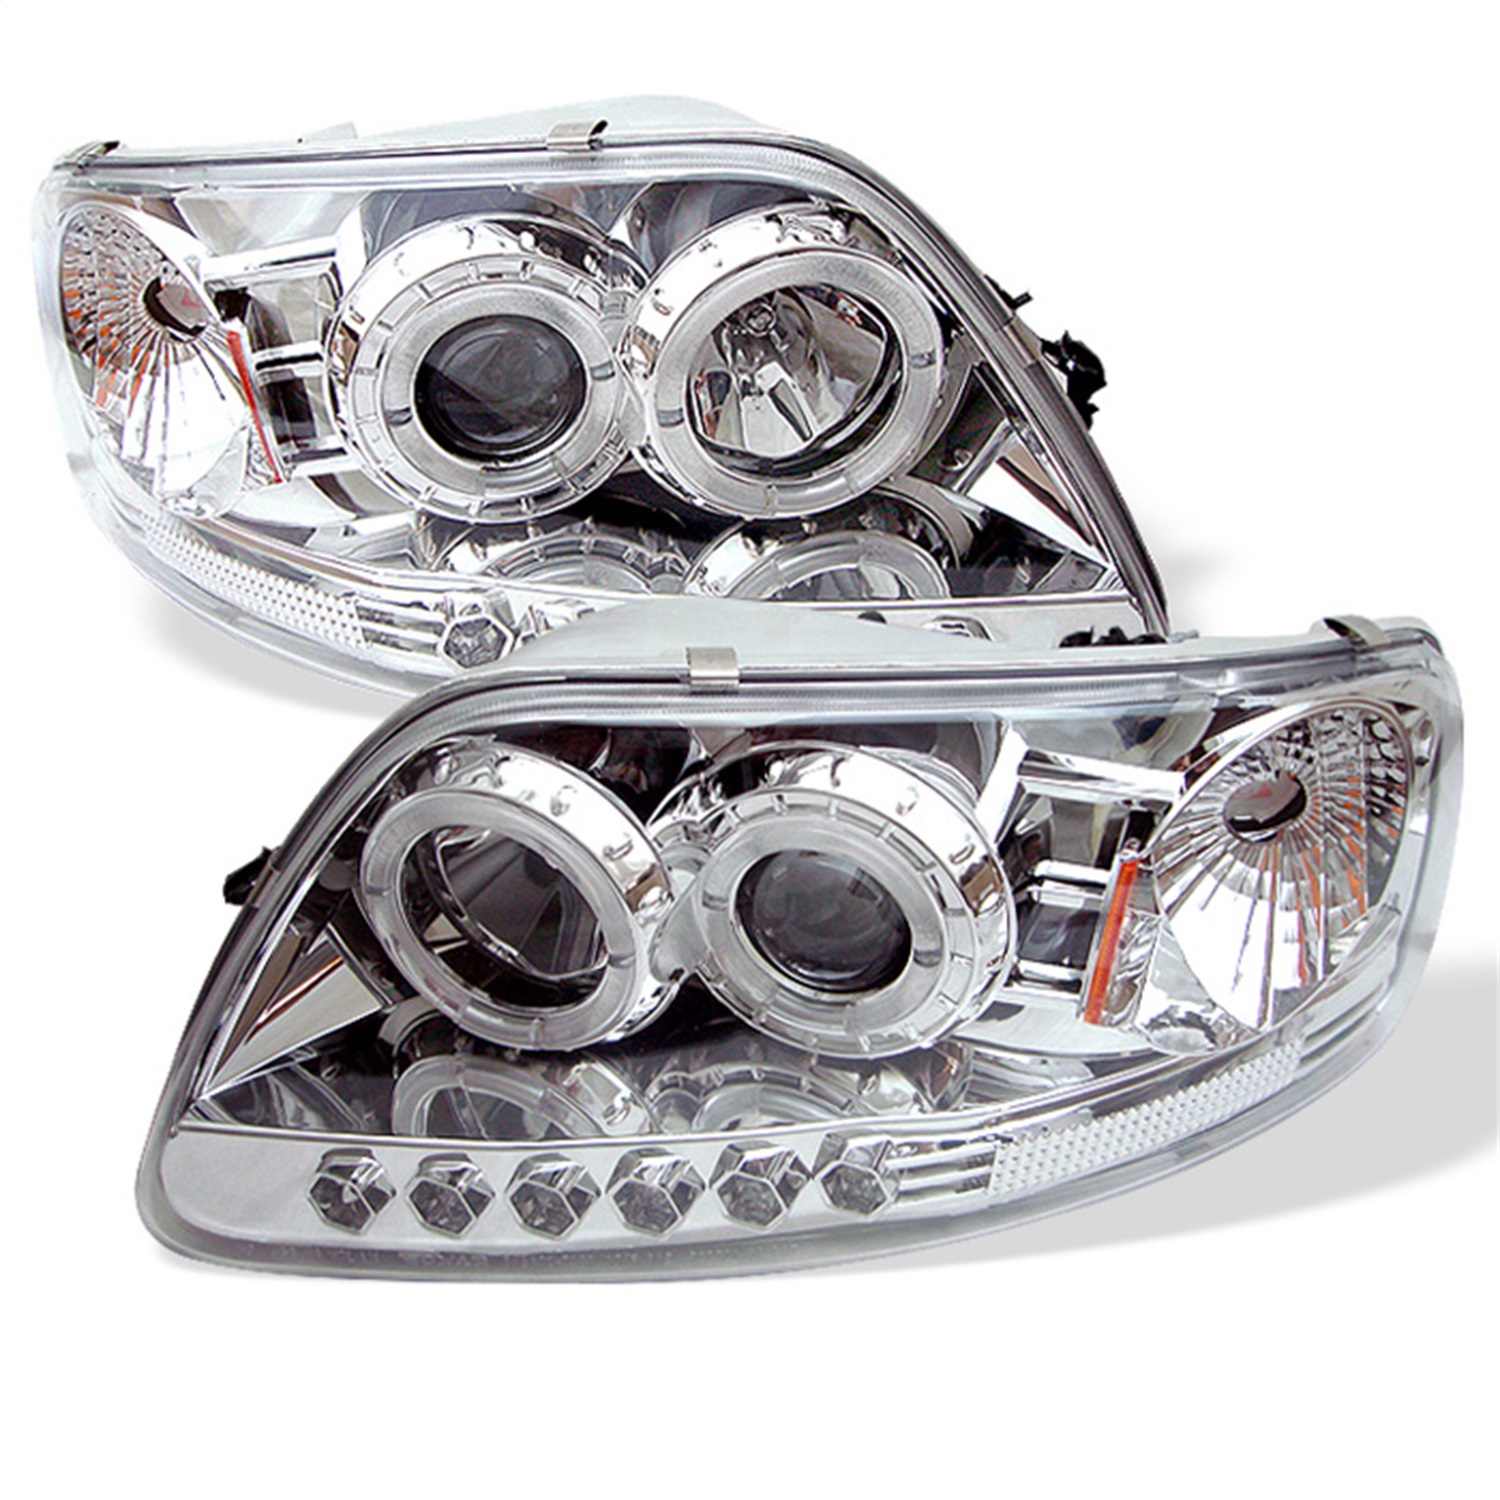 Spyder Auto 5010278 Halo LED Projector Headlights Fits 97-03 Expedition F-150